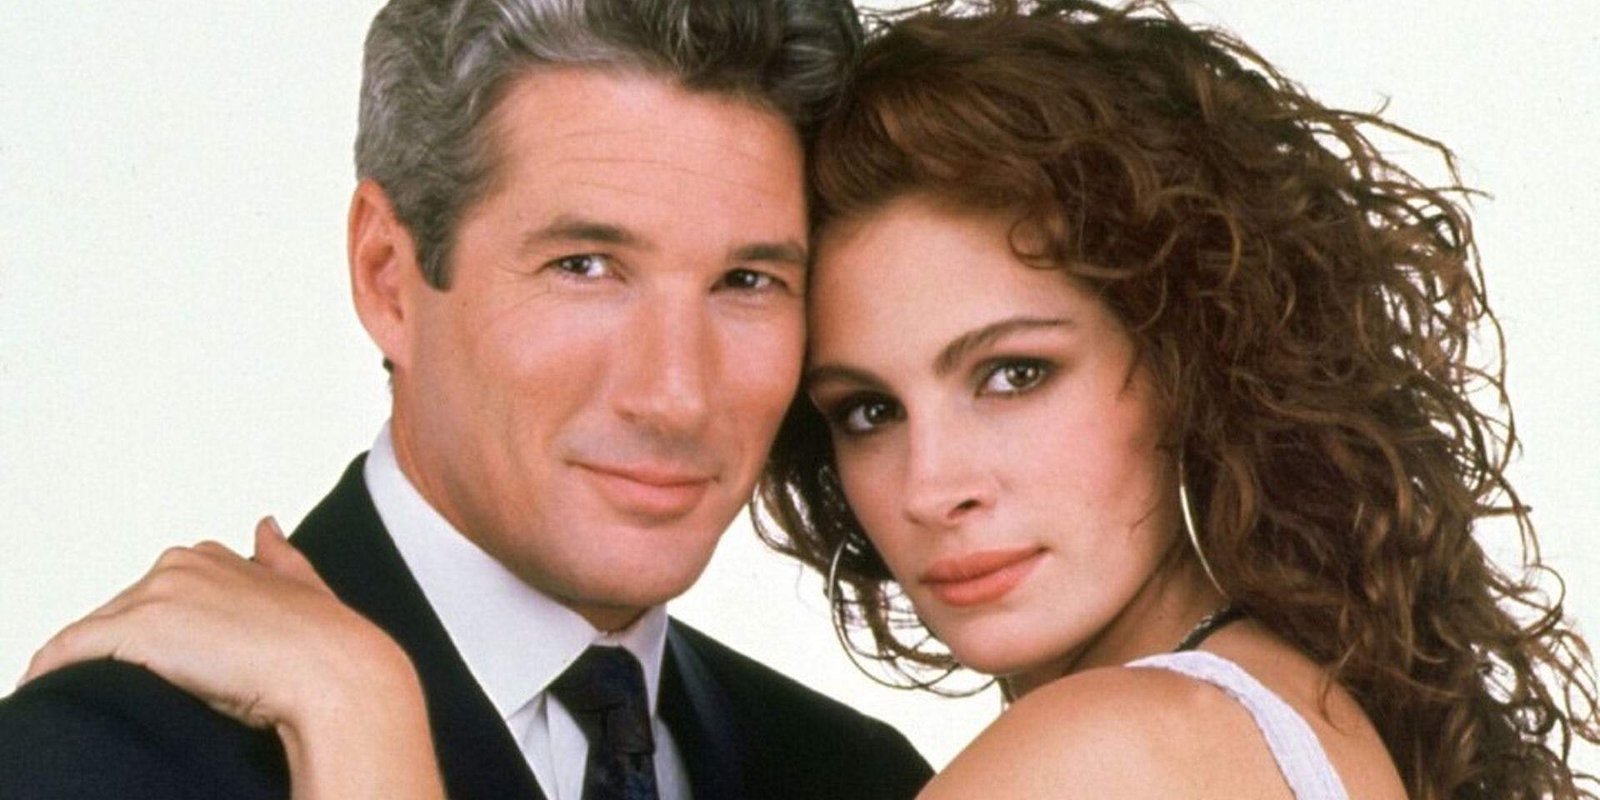 Movies about rich people: Pretty Woman